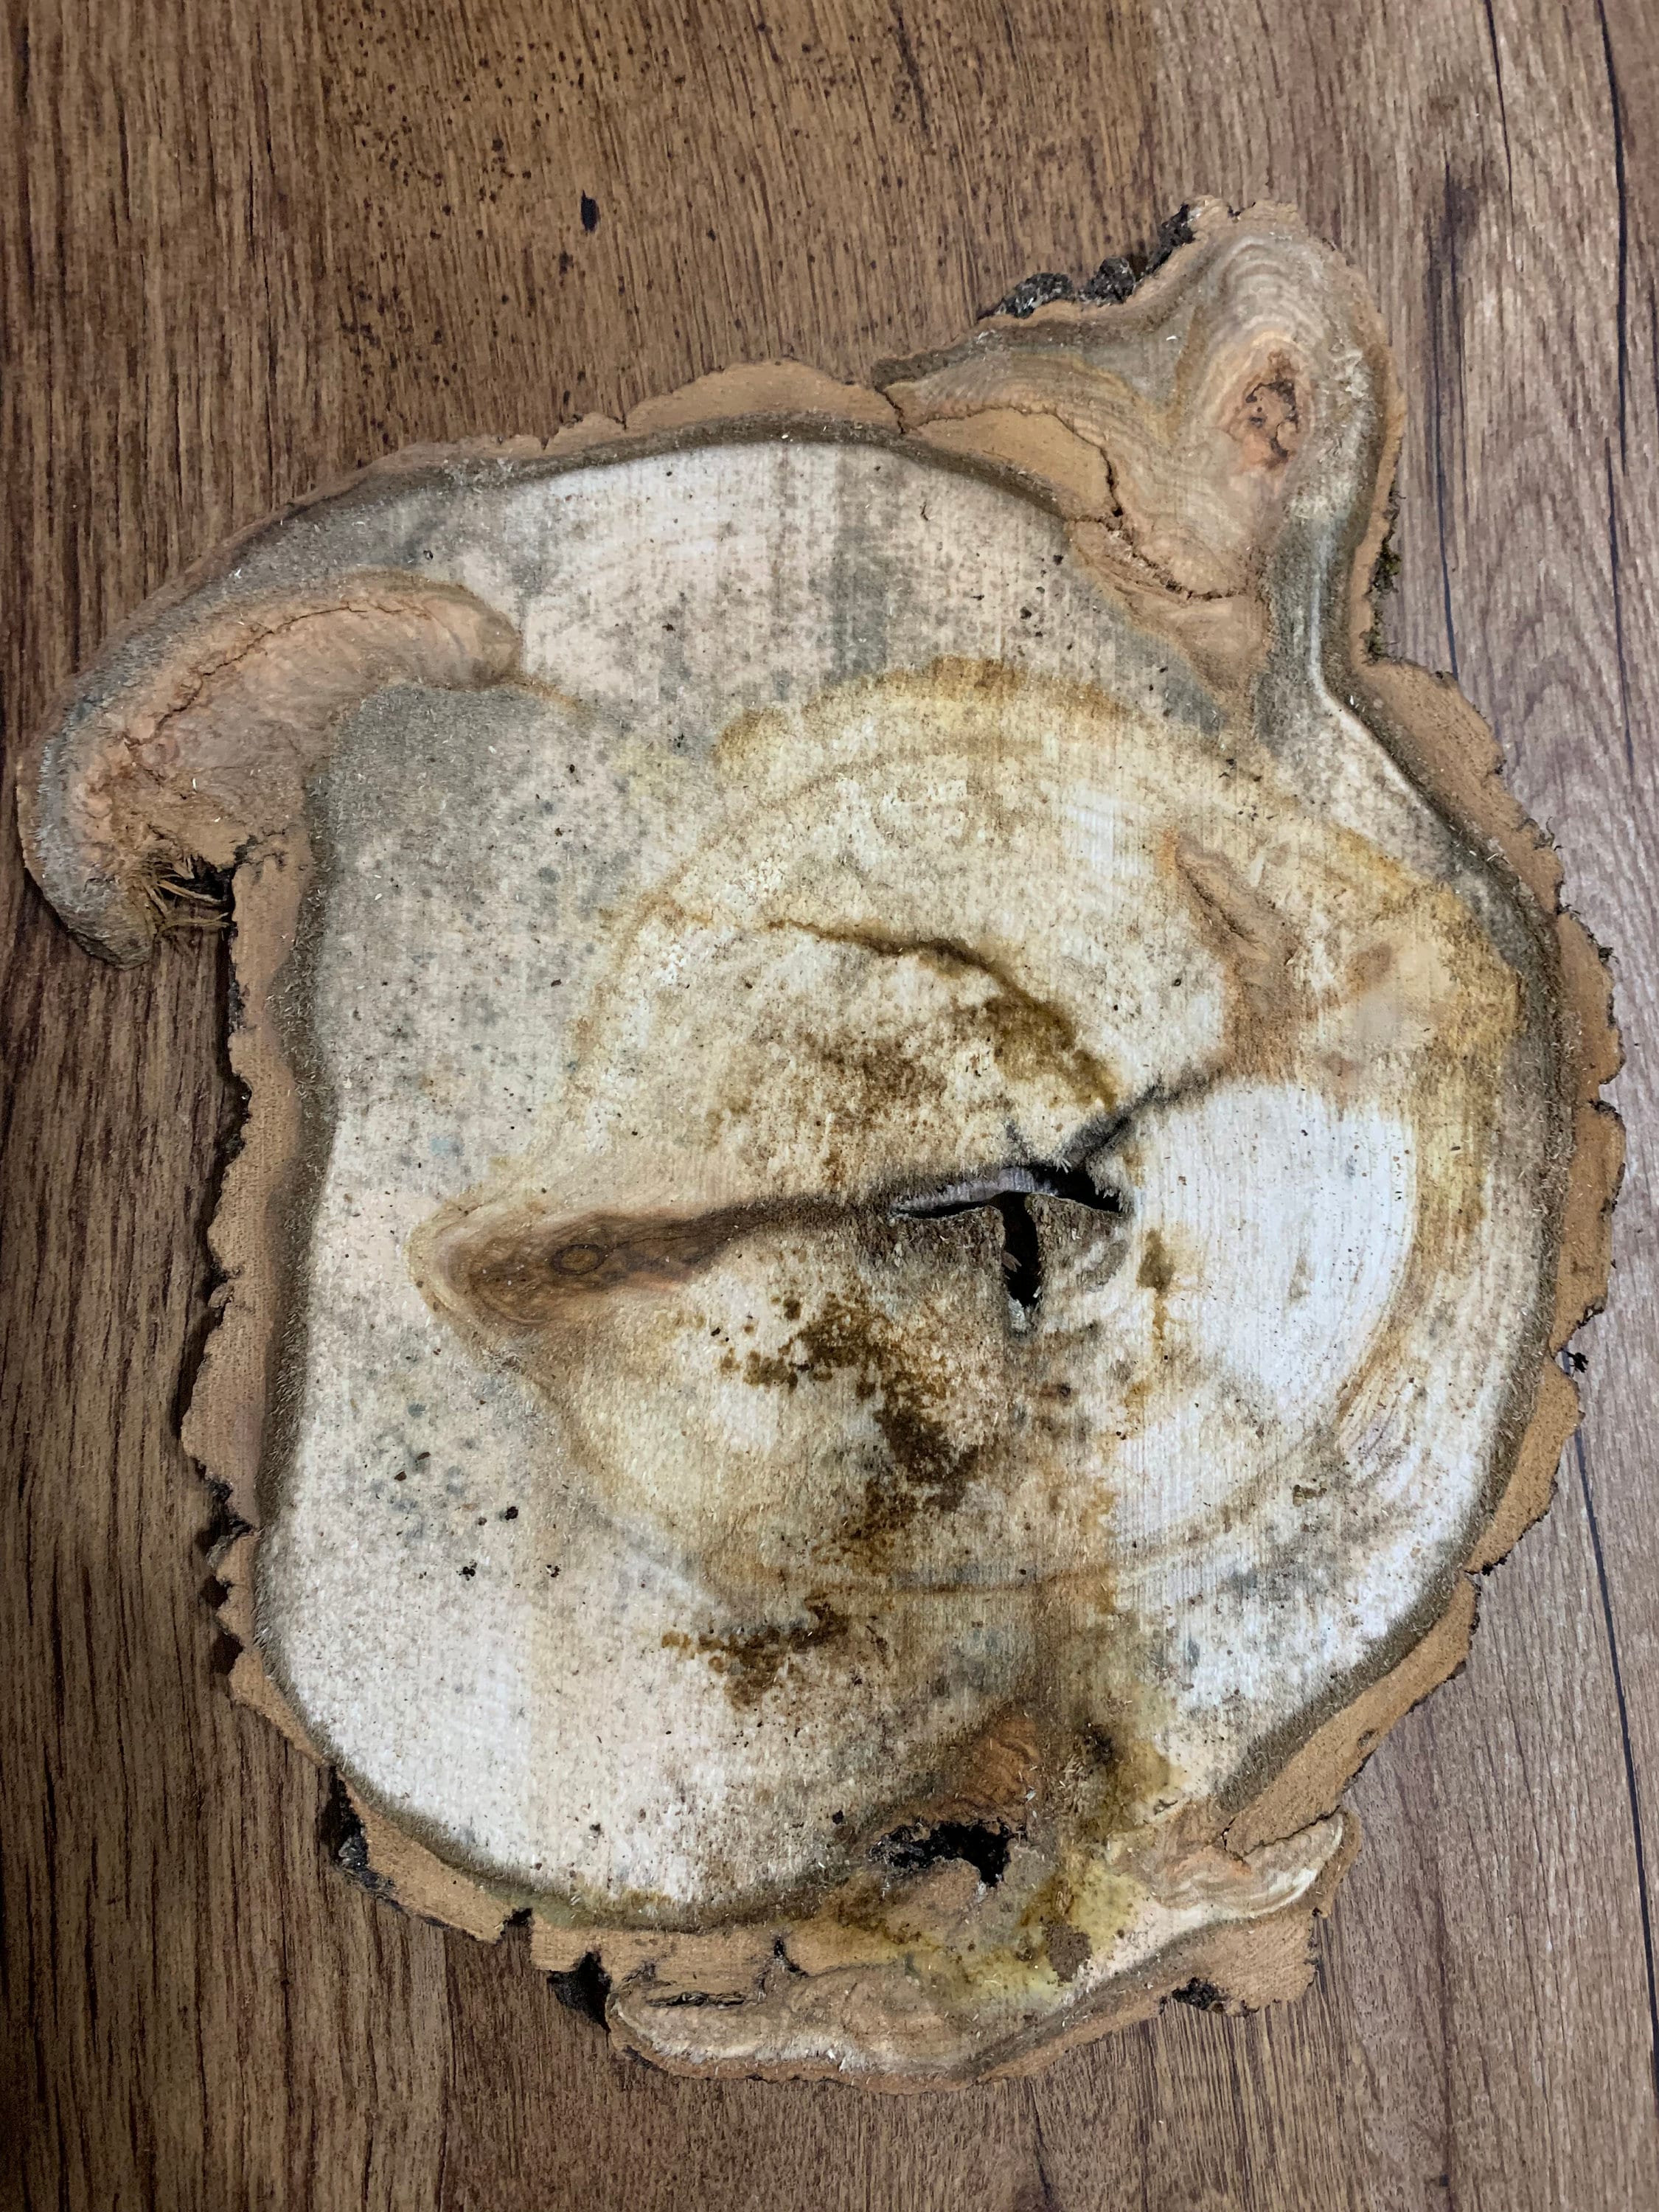 Aspen Burl Slice, Approximately 13 Inches Long by 11 Inches Wide and 3/4 Inches Thick